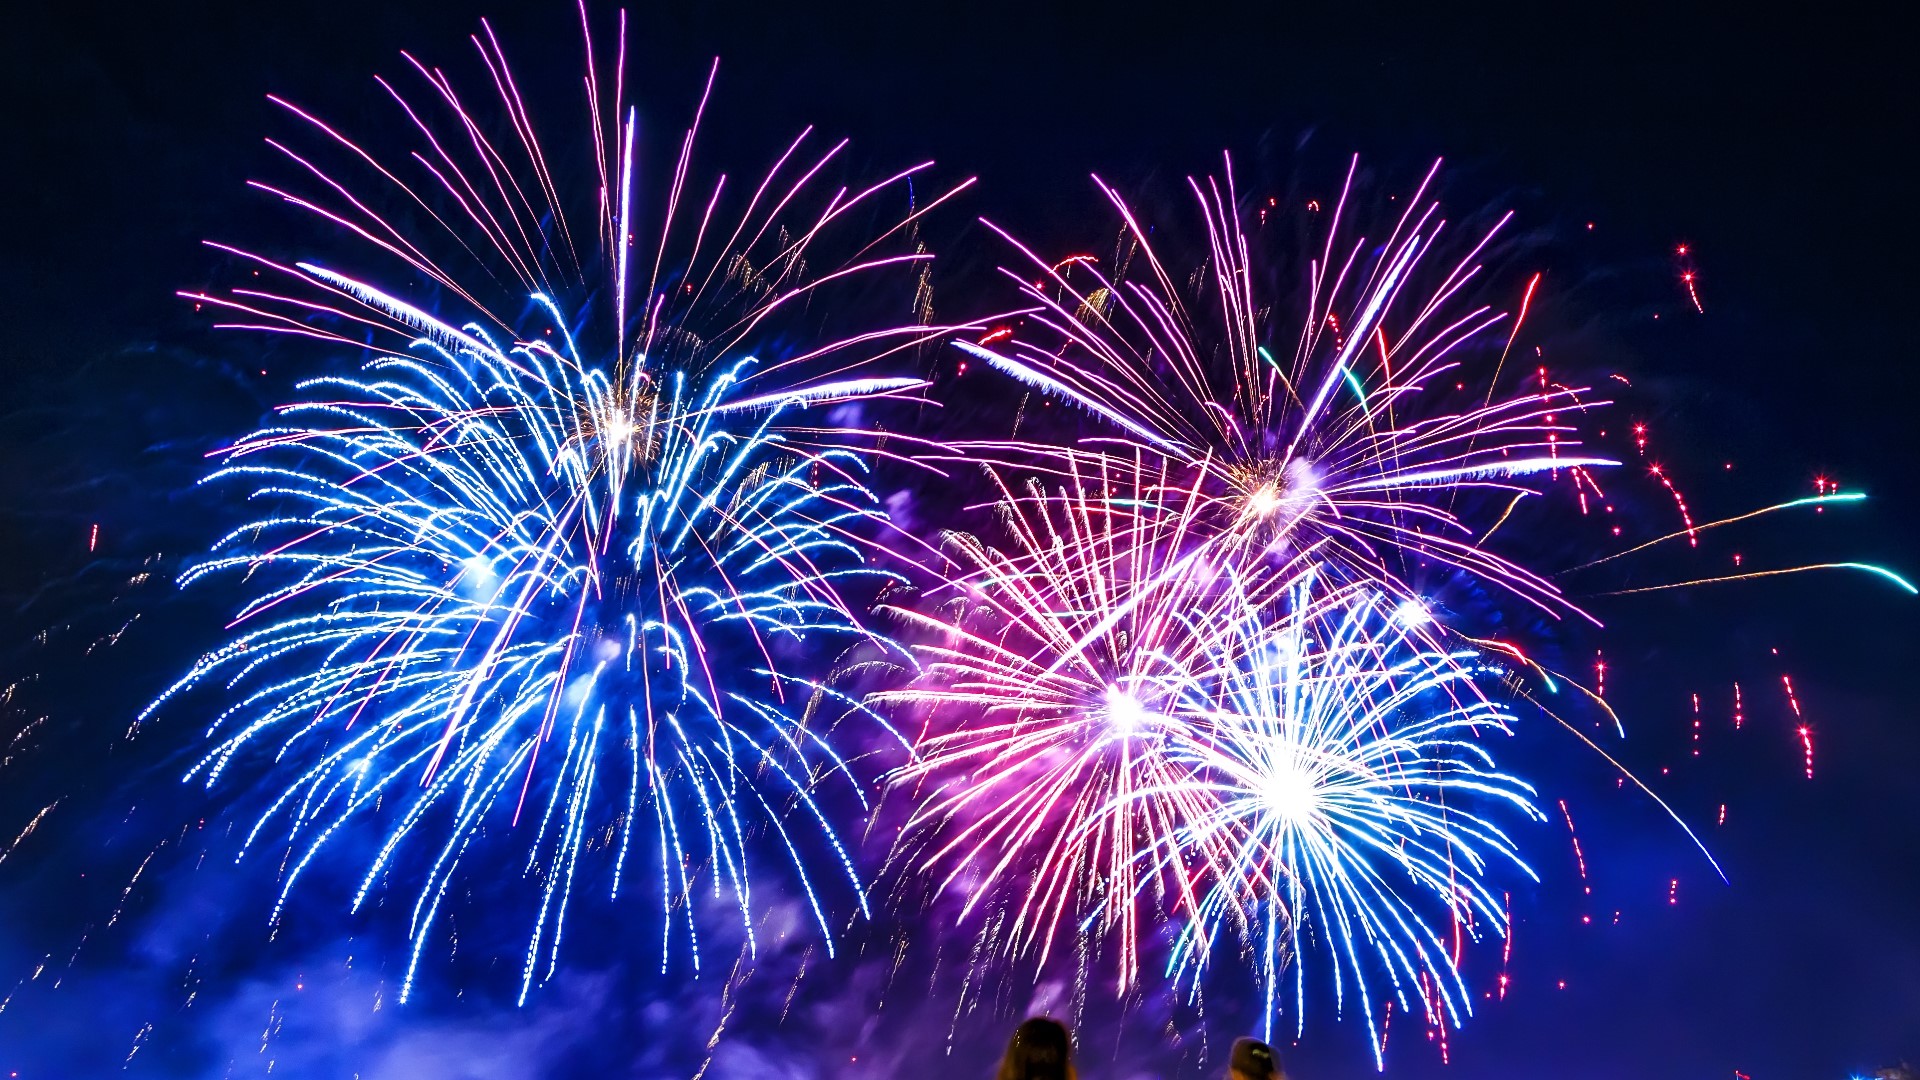 Wheat Ridge police stated the penalty for setting off illegal fireworks this year is $999 and up to a year in jail.